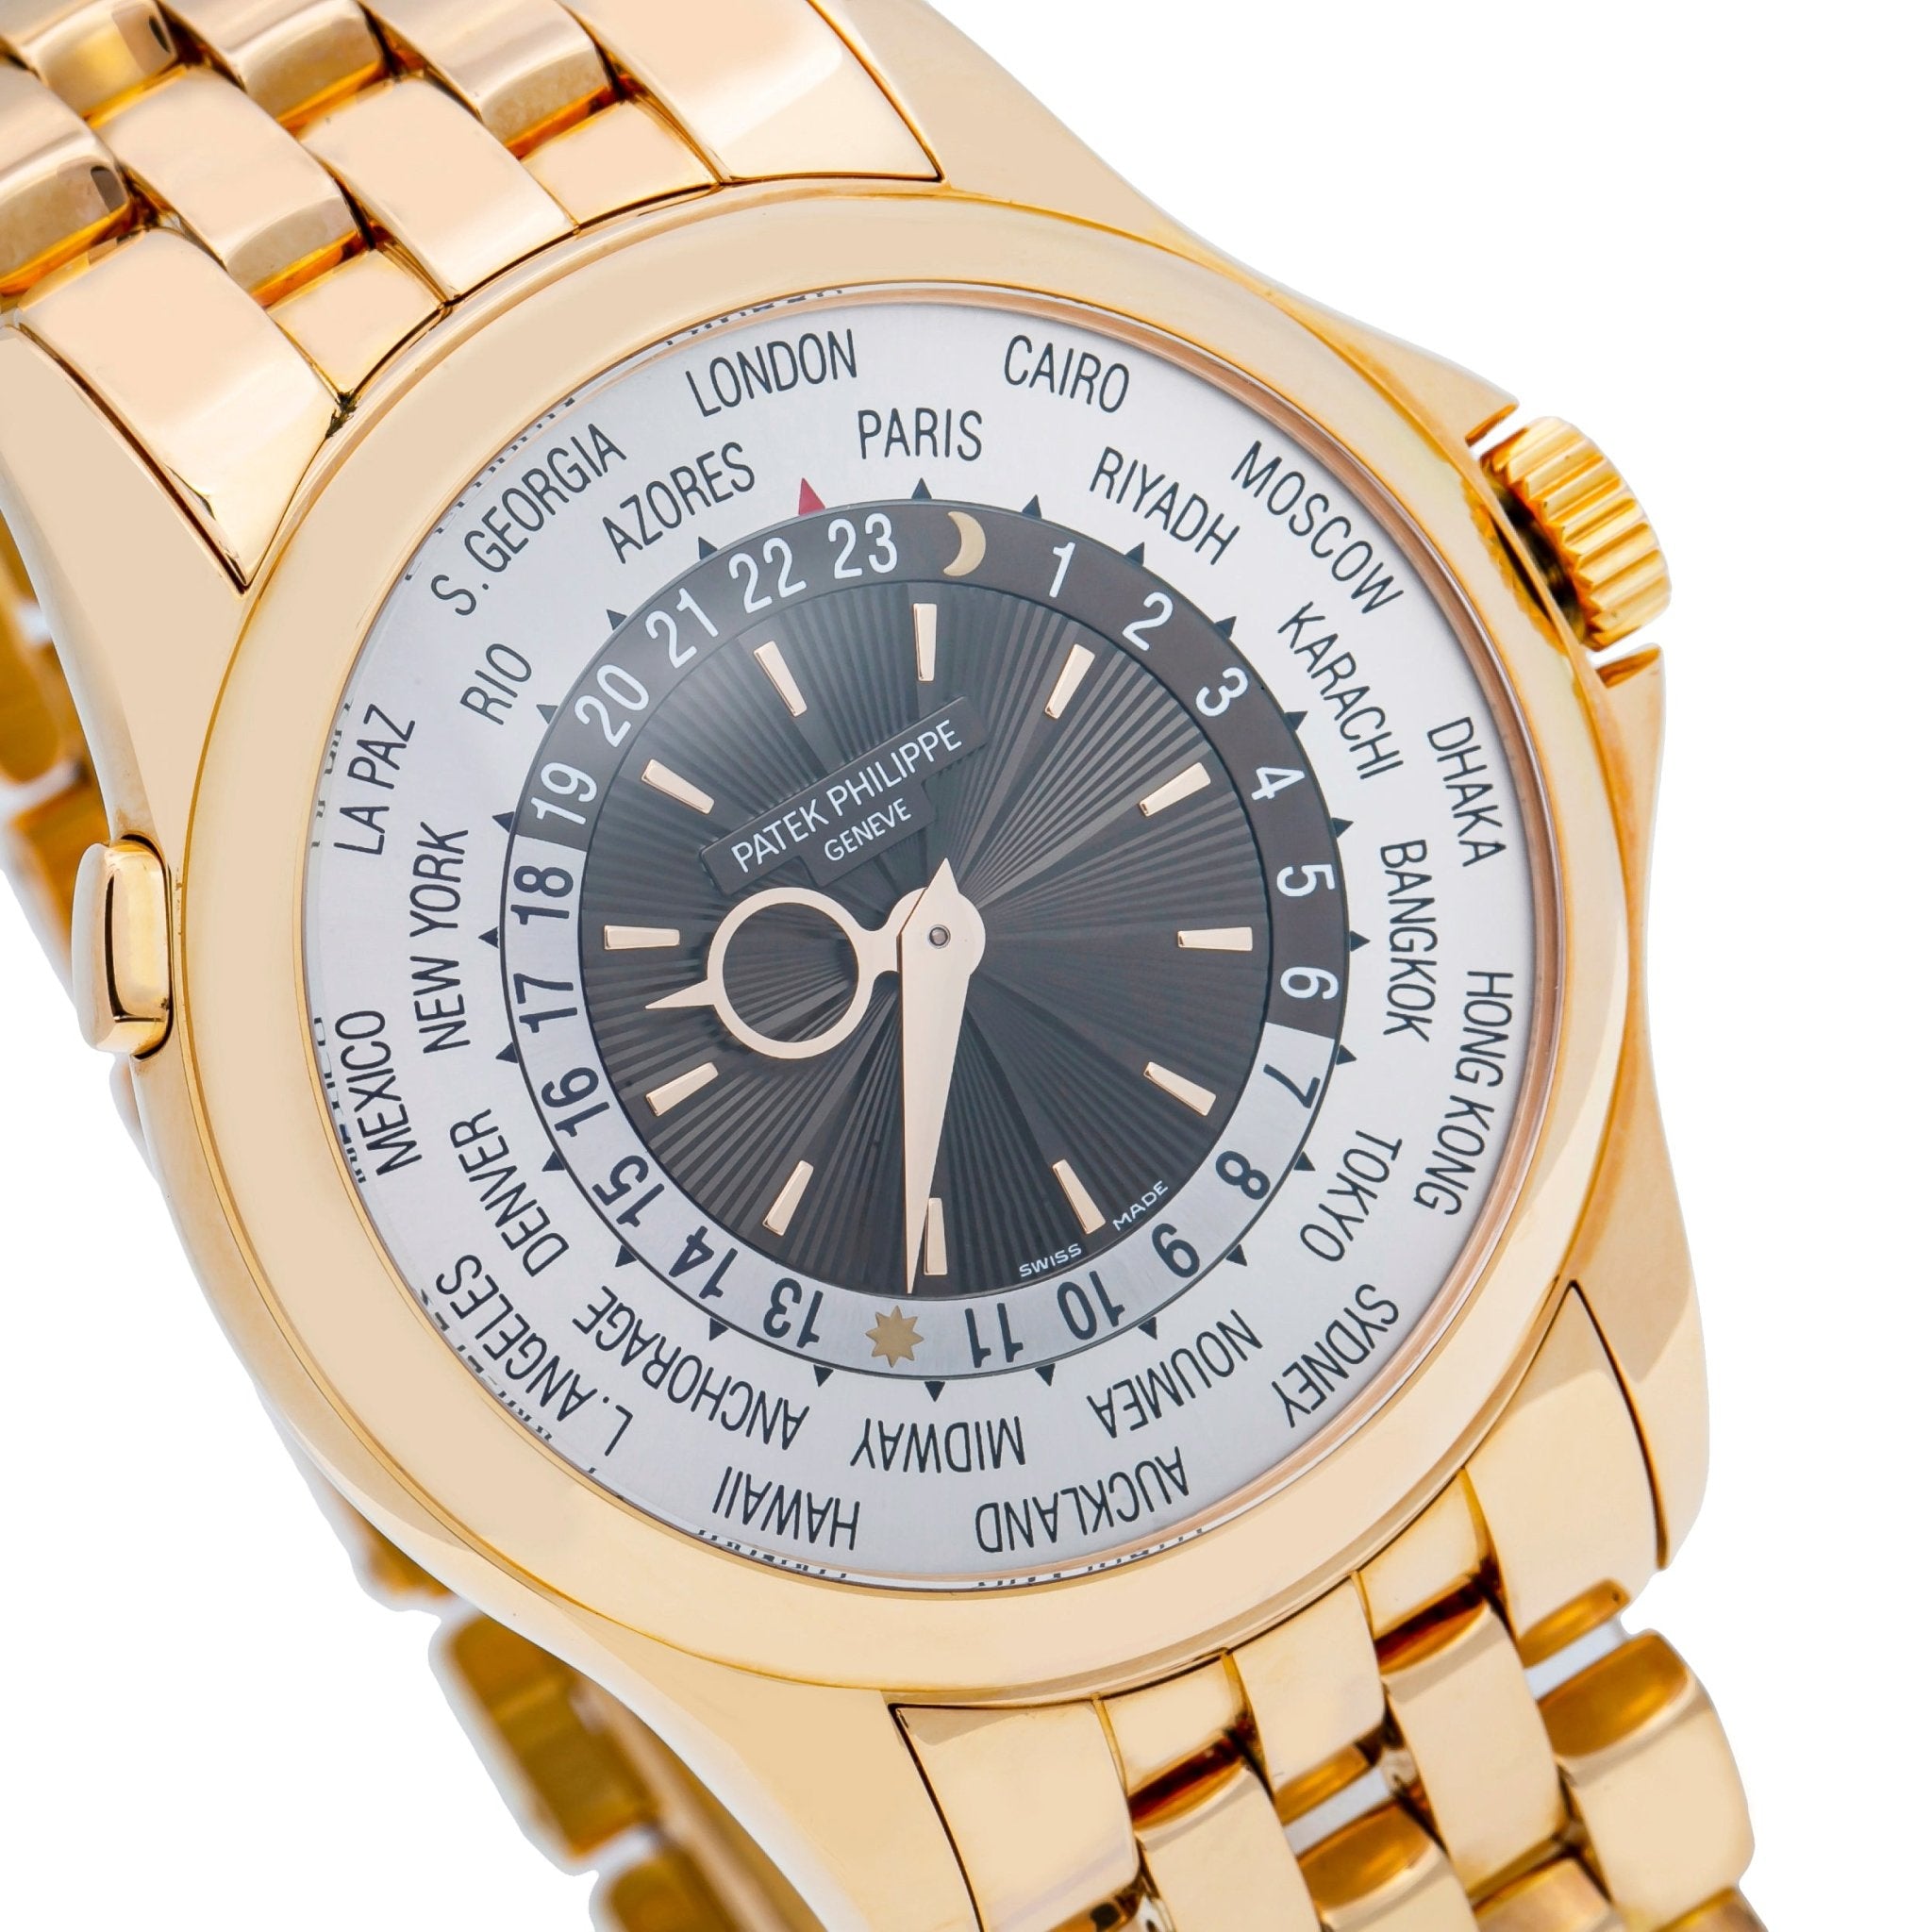 Patek Philippe World Time Complicated 18k Rose Gold (Ref#5130/1R-011) - WatchesOff5thWatch